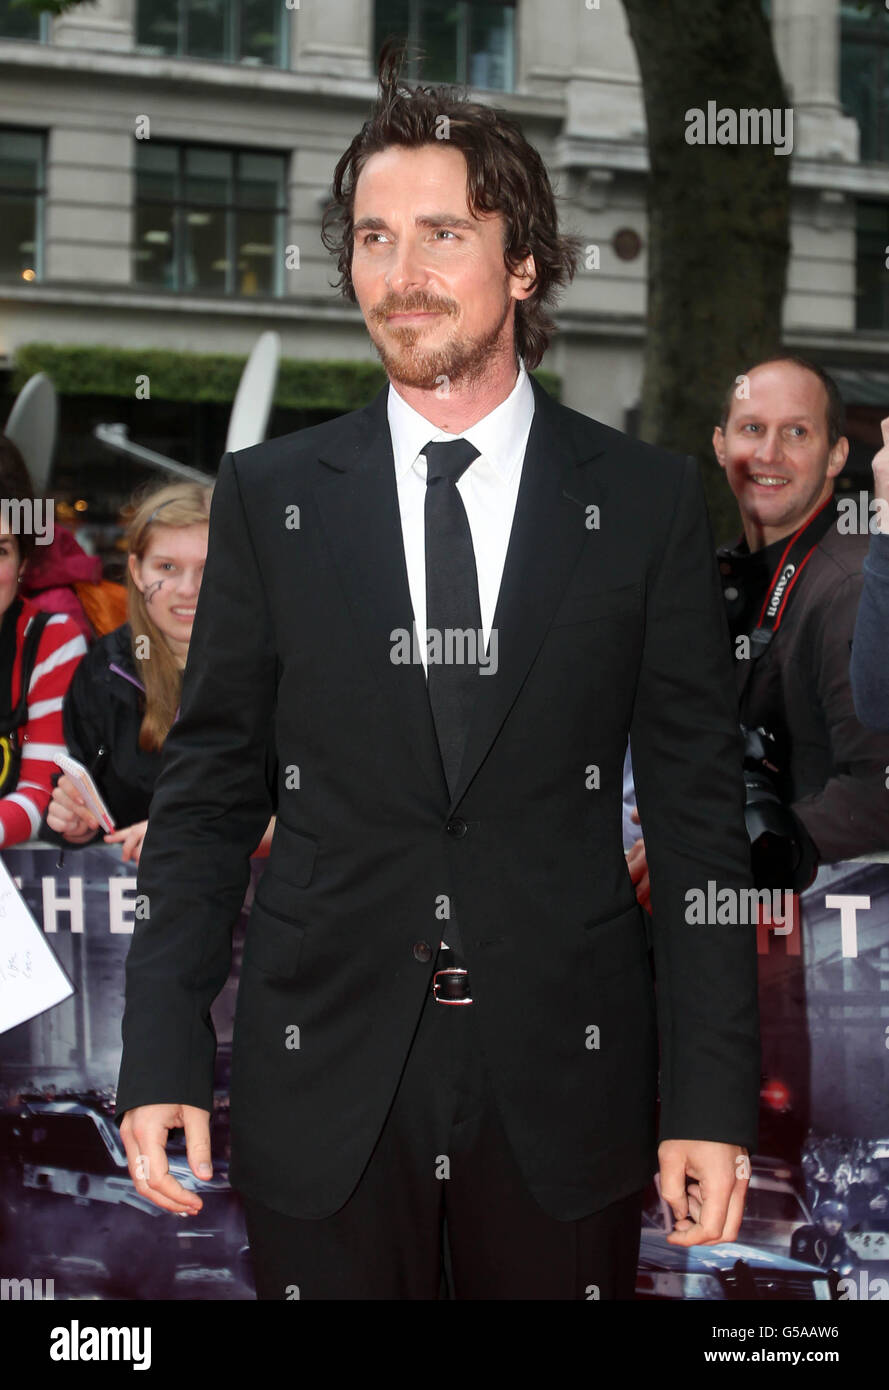 Christian Bale at the premiere of the new Batman film, The Dark Knight  Rises at the Odeon Leicester Square, London Stock Photo - Alamy